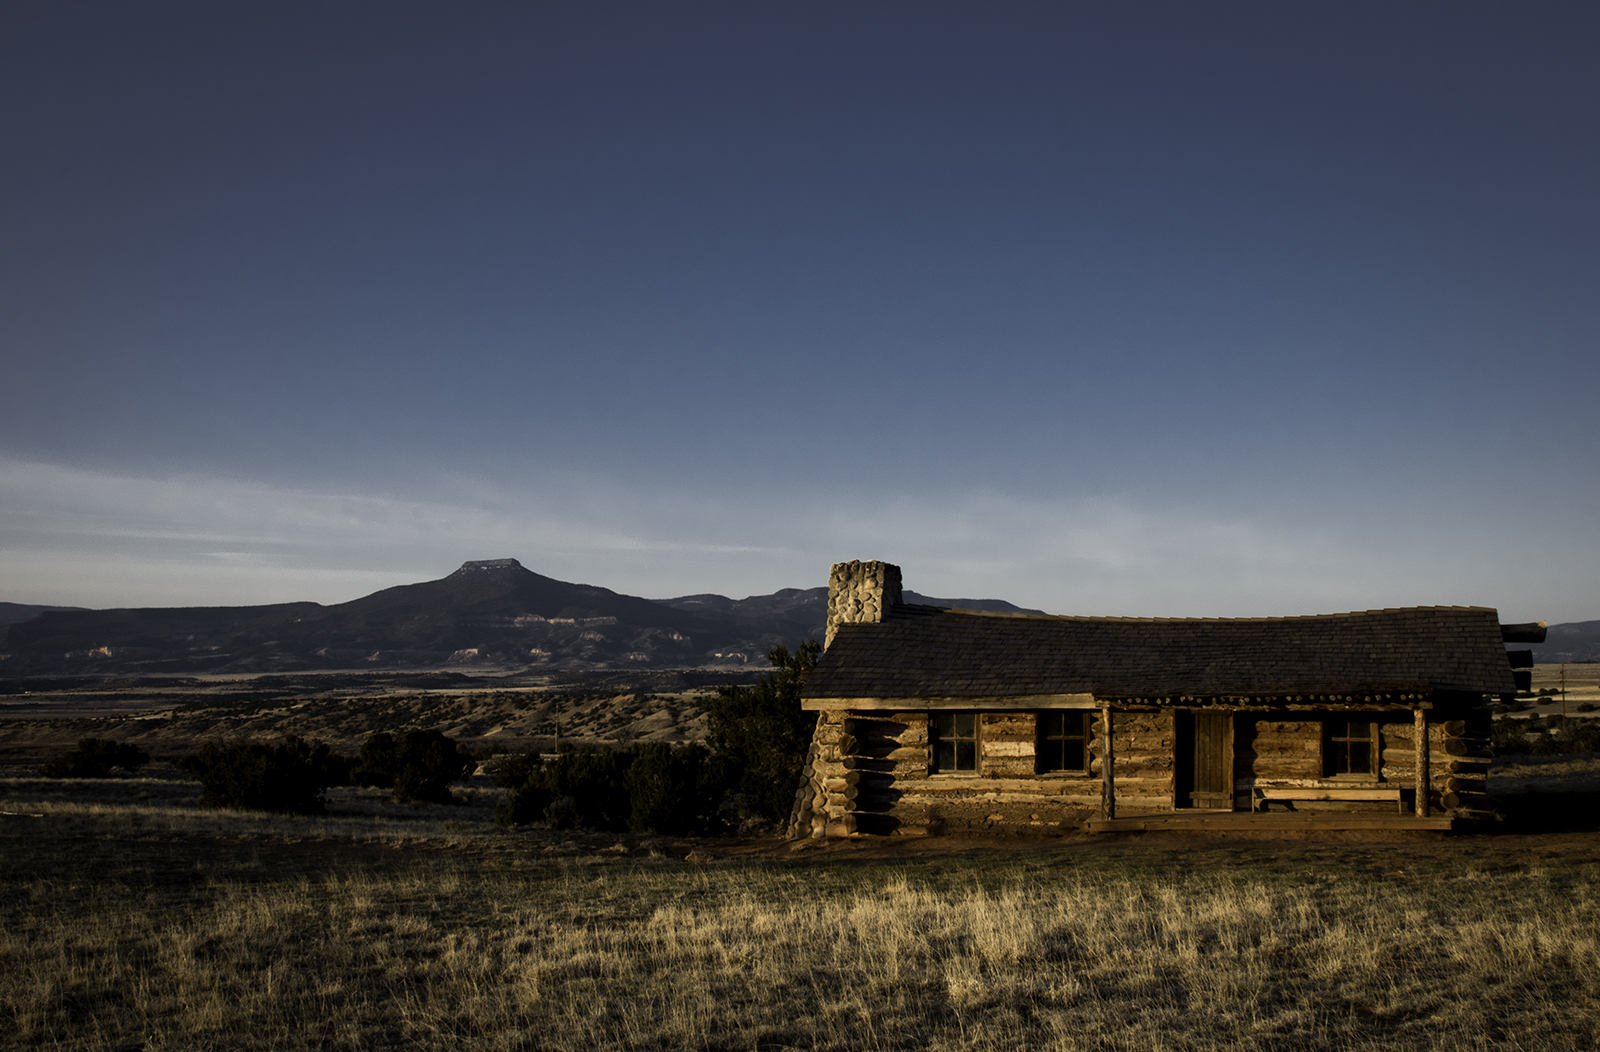 City Slickers Cabin on Ghost Ranch at sunrise, Pedernal mountain in the distance.